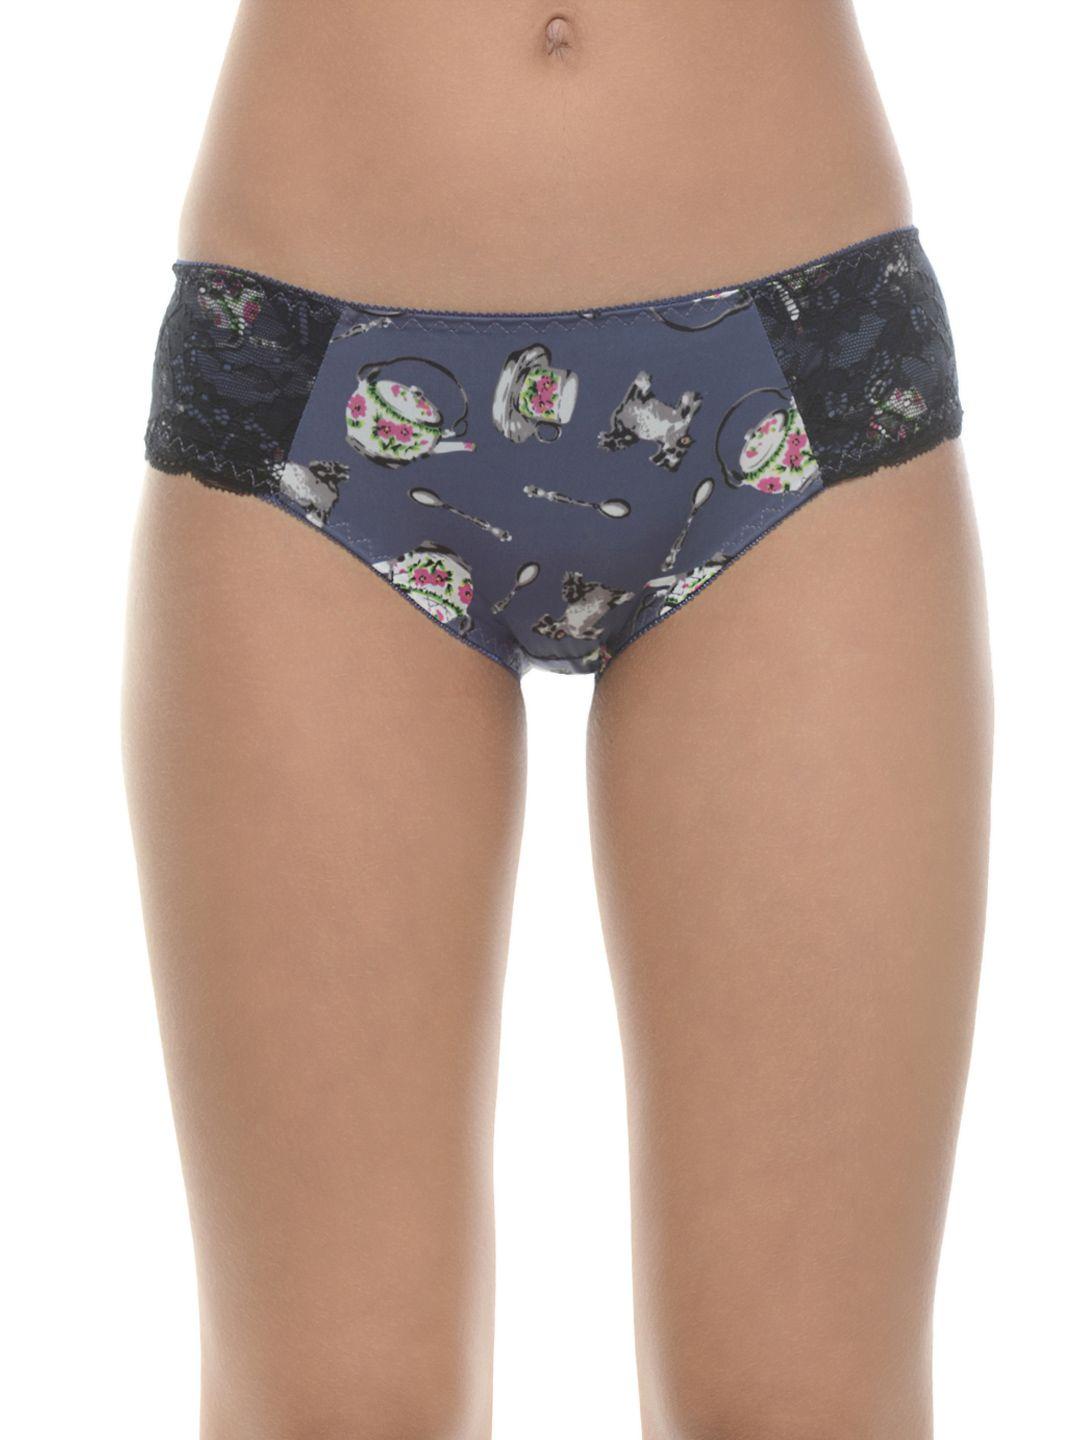 da intimo women grey printed briefs with lace detail diu-196